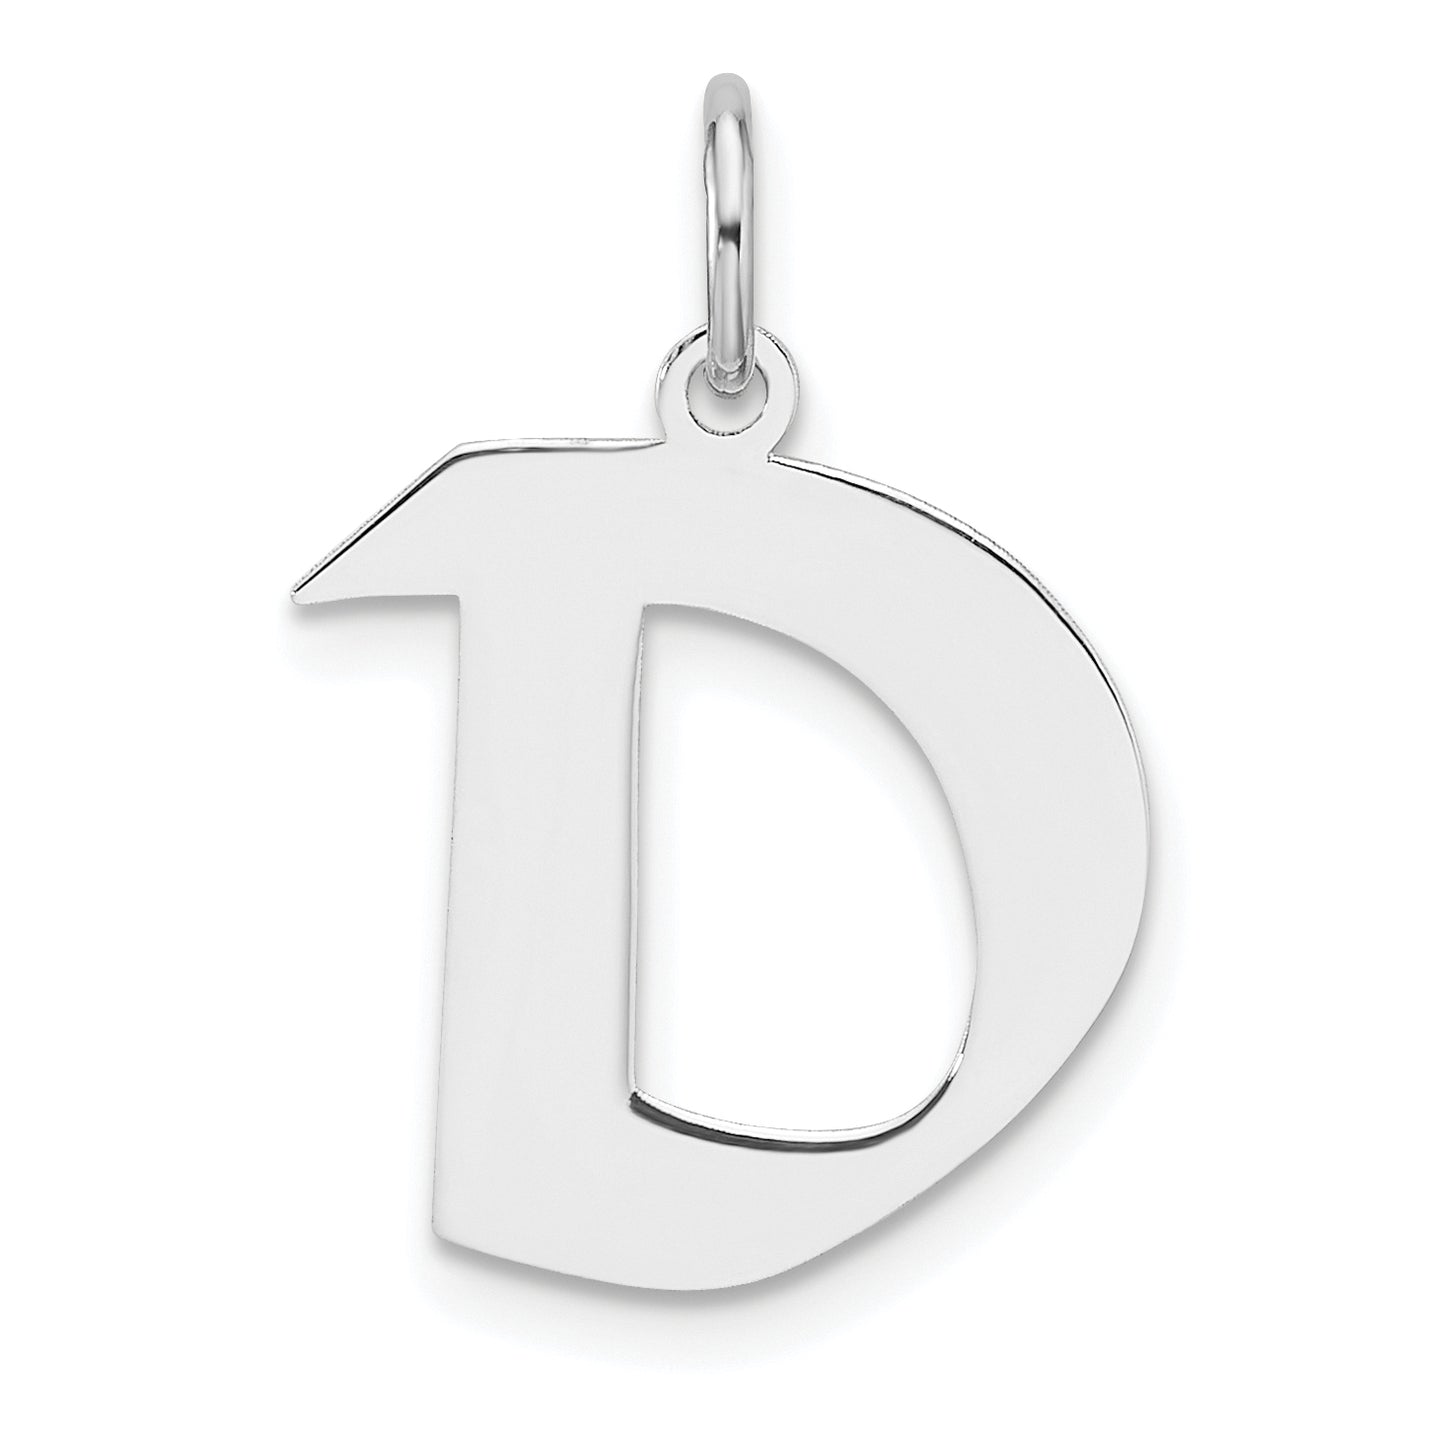 Small Sterling Silver Rhodium-plated Artisan Block Letter D Initial Charm